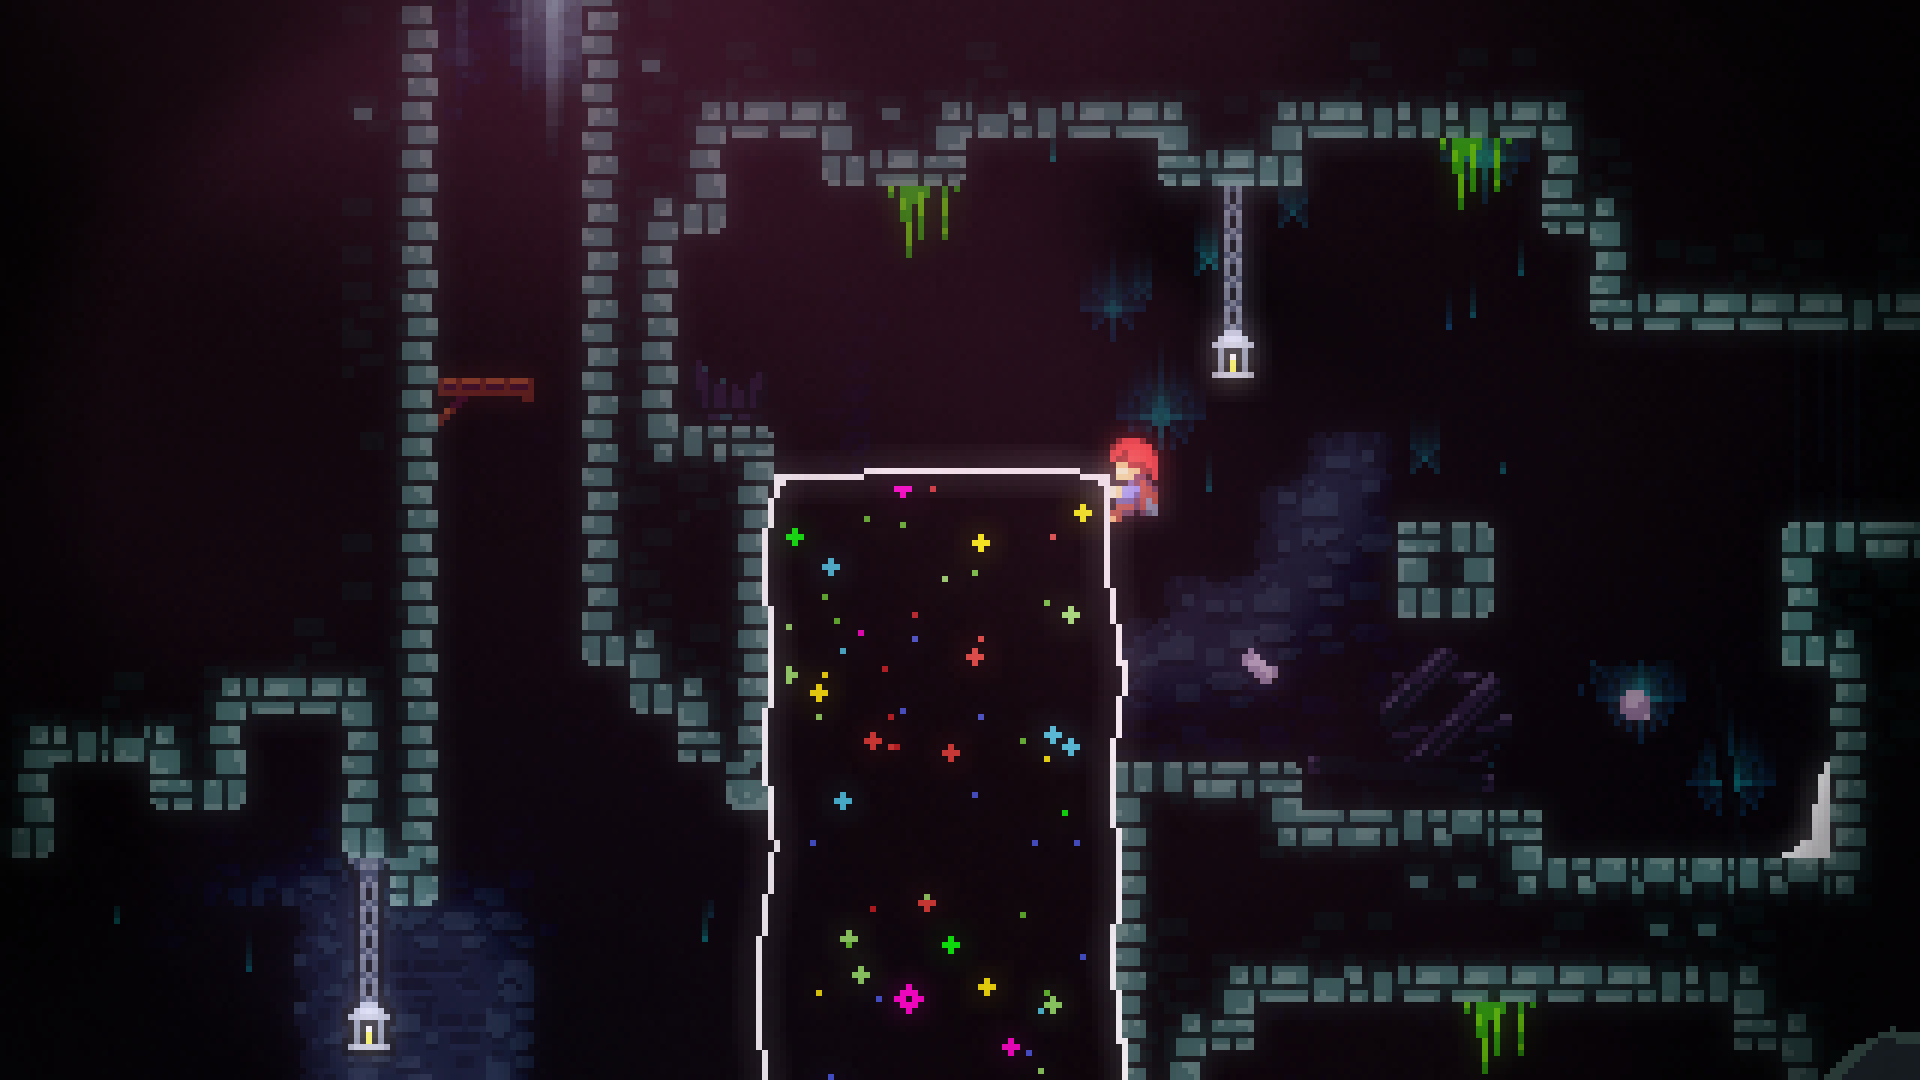 Towerfall Creator’s New Game, Celeste, Gets a Nintendo Switch Port